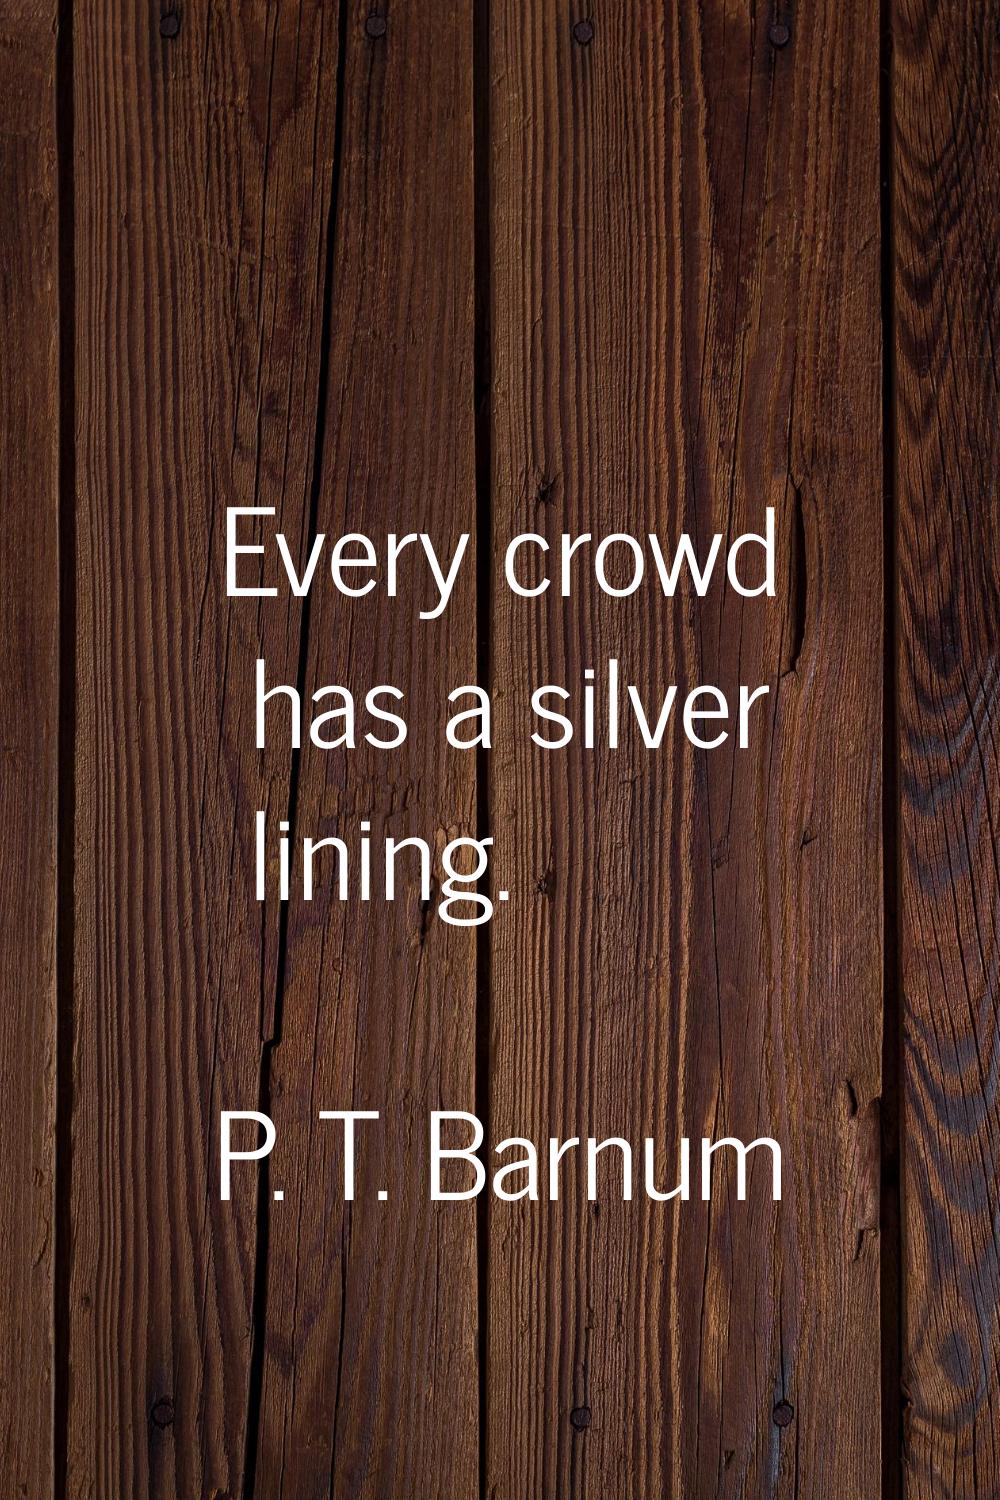 Every crowd has a silver lining.